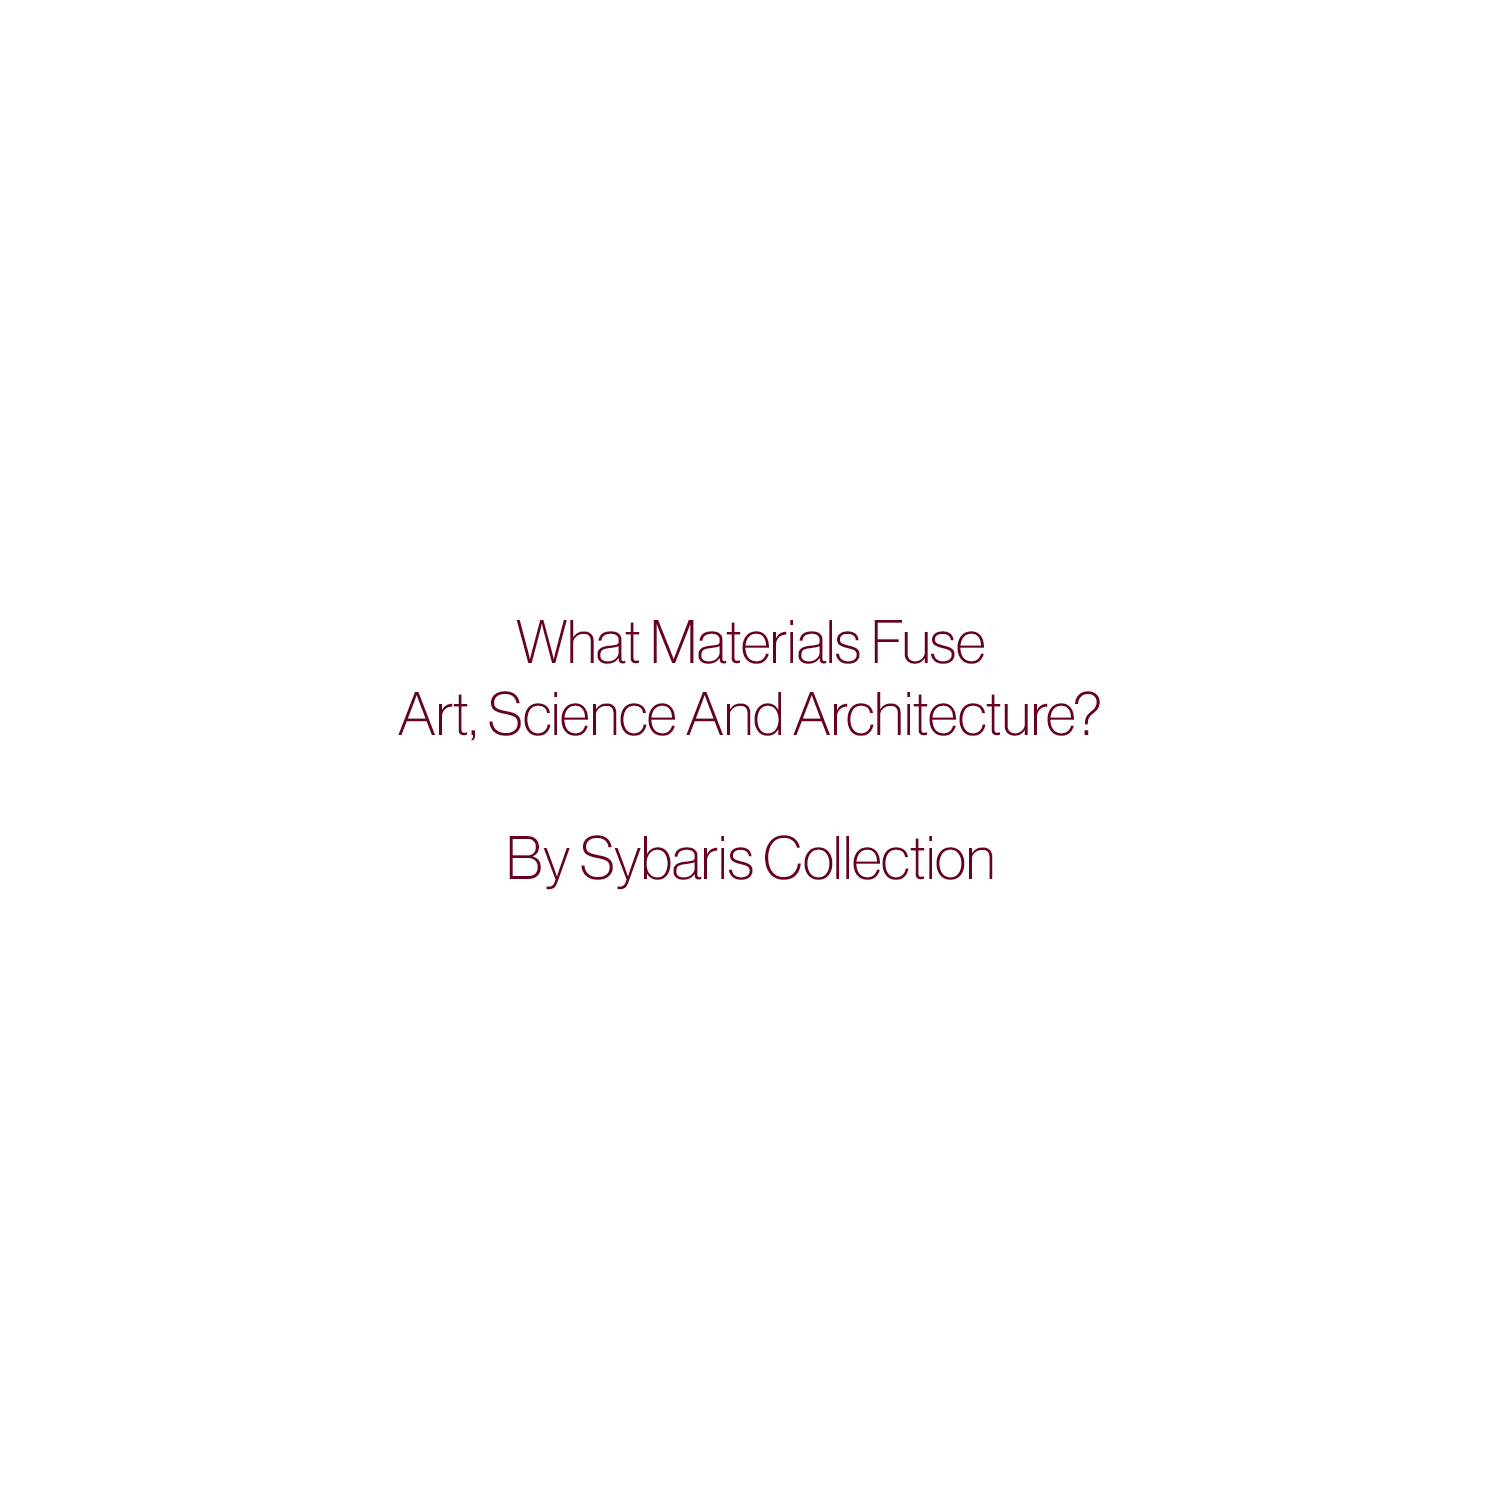 What Materials Fuse Art, Science And Architecture (first part)